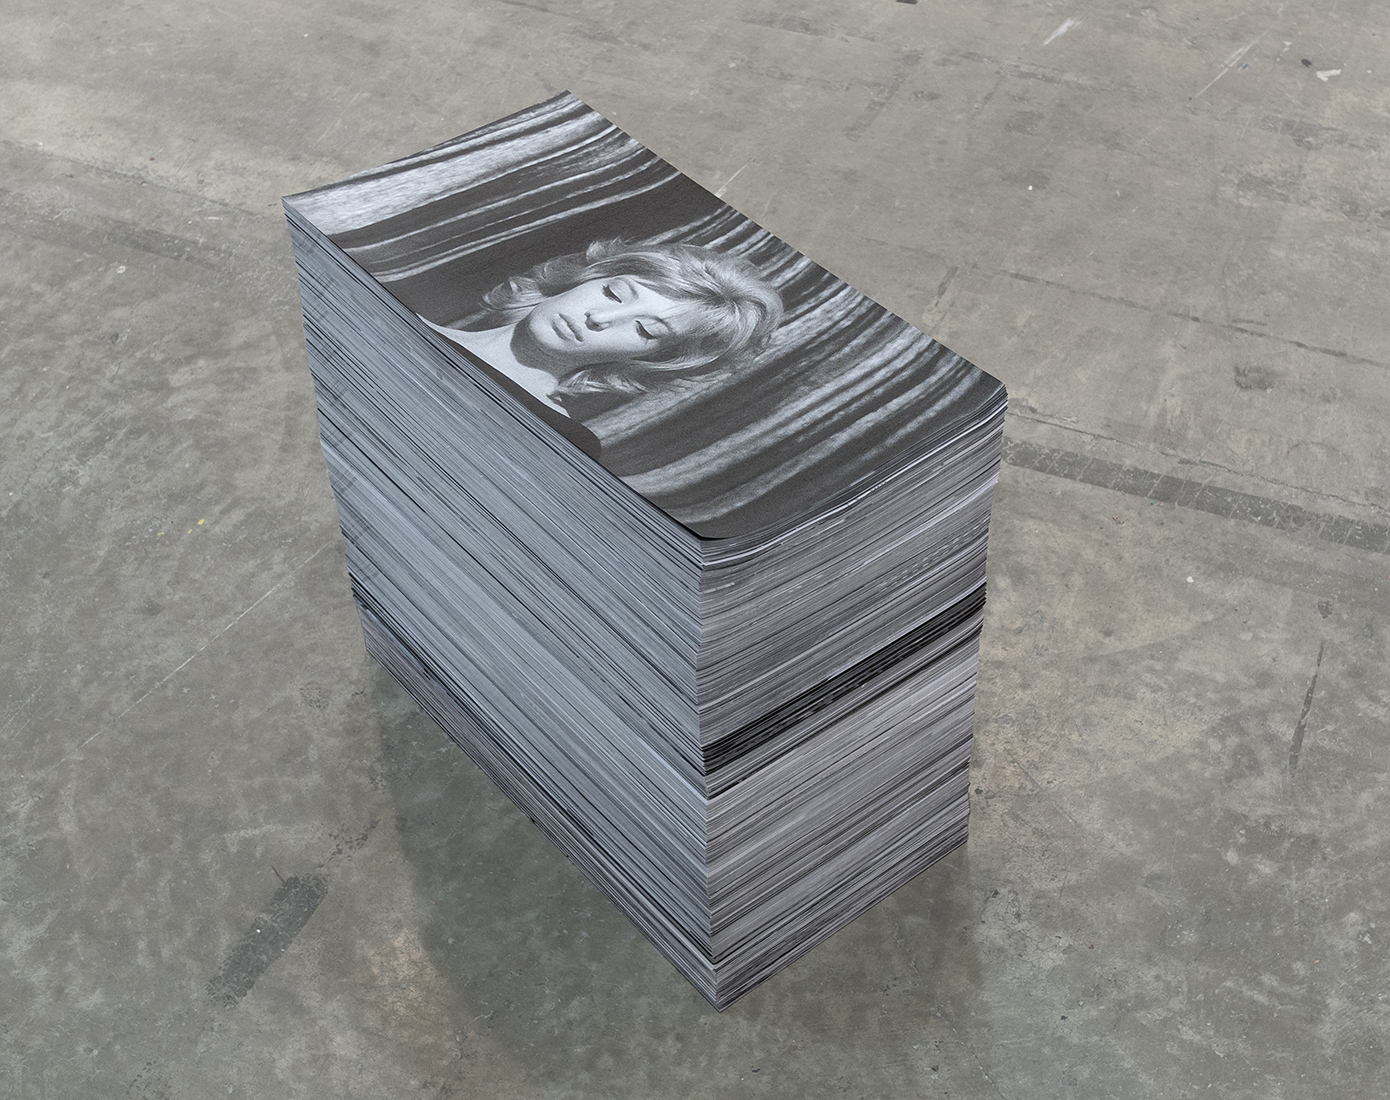    Our feature presentation,  2015.   Intrsuctable for endless supply of 7,287 film stills printed on paper.  32 x 65 cm each. 